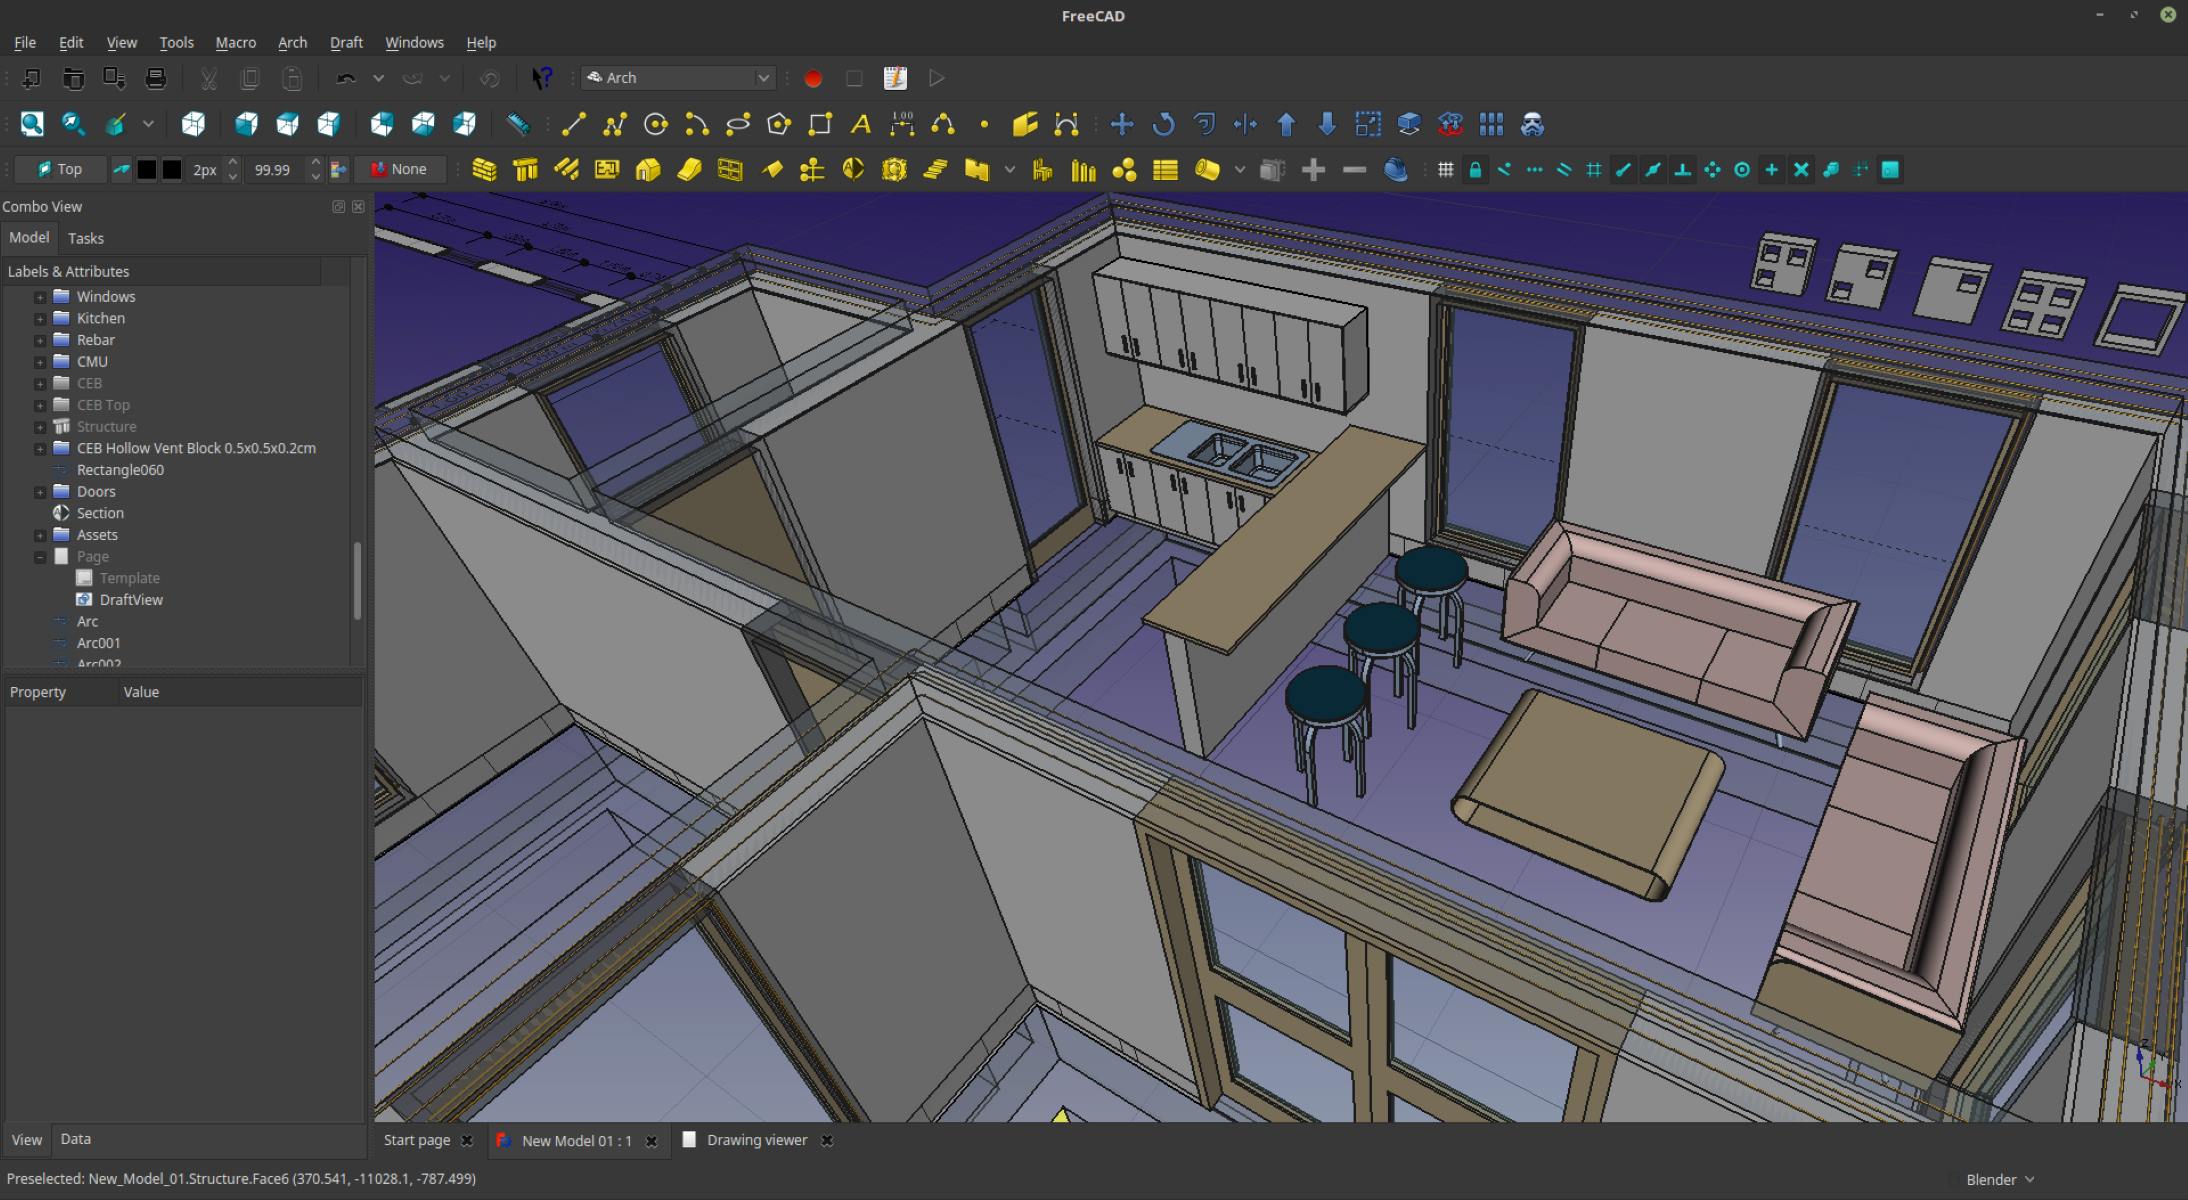 How To Use FreeCAD To Design A House